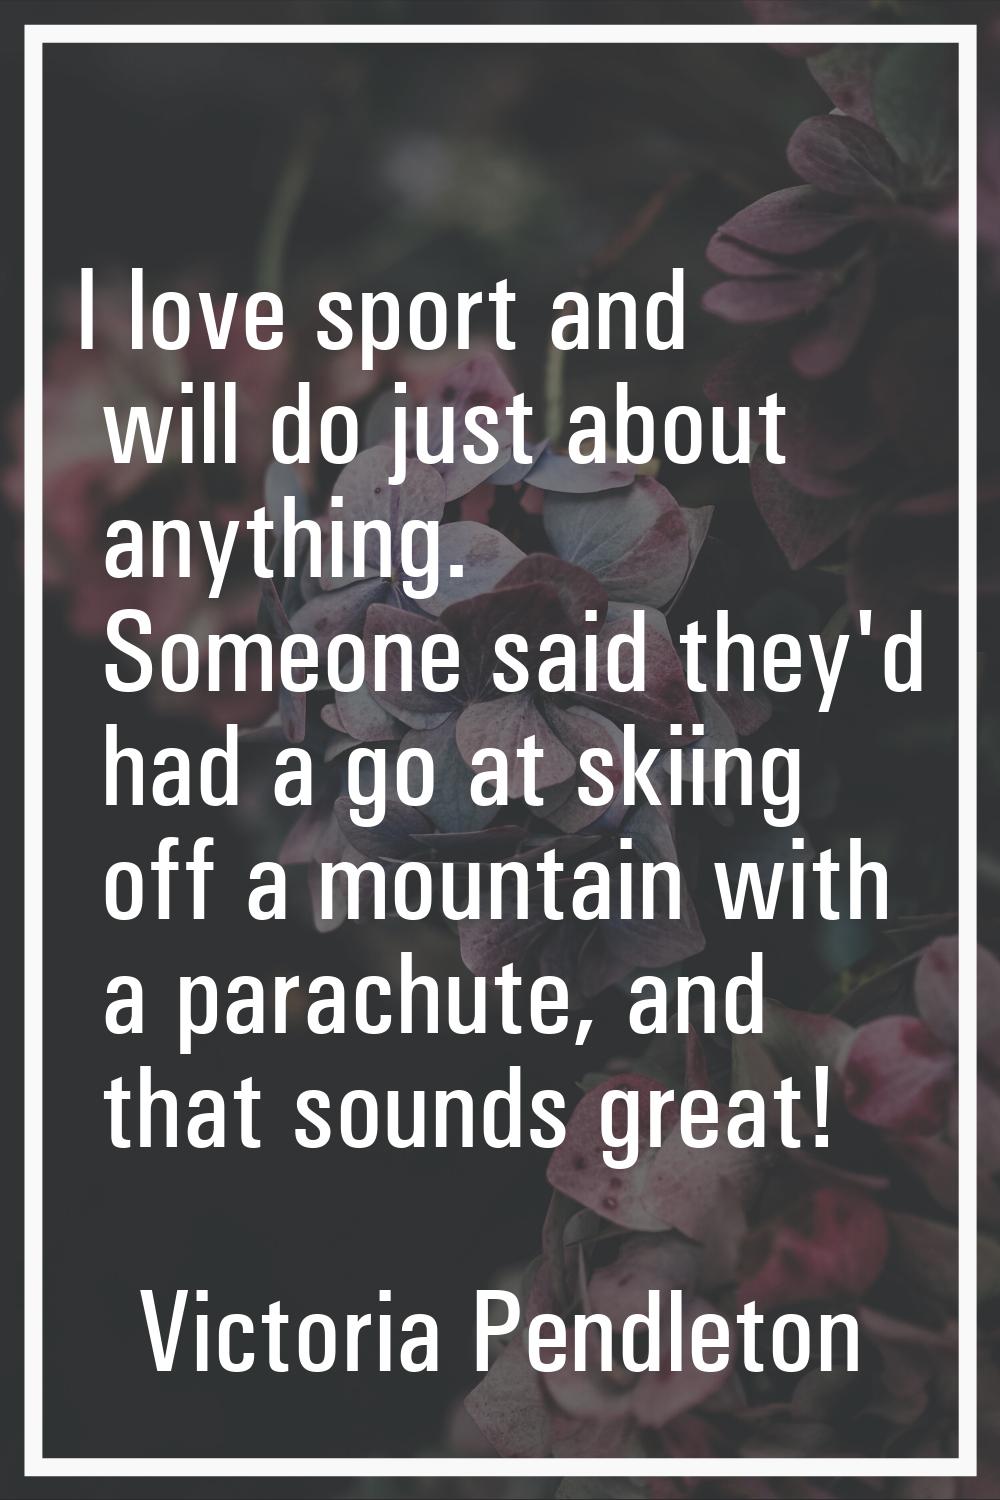 I love sport and will do just about anything. Someone said they'd had a go at skiing off a mountain